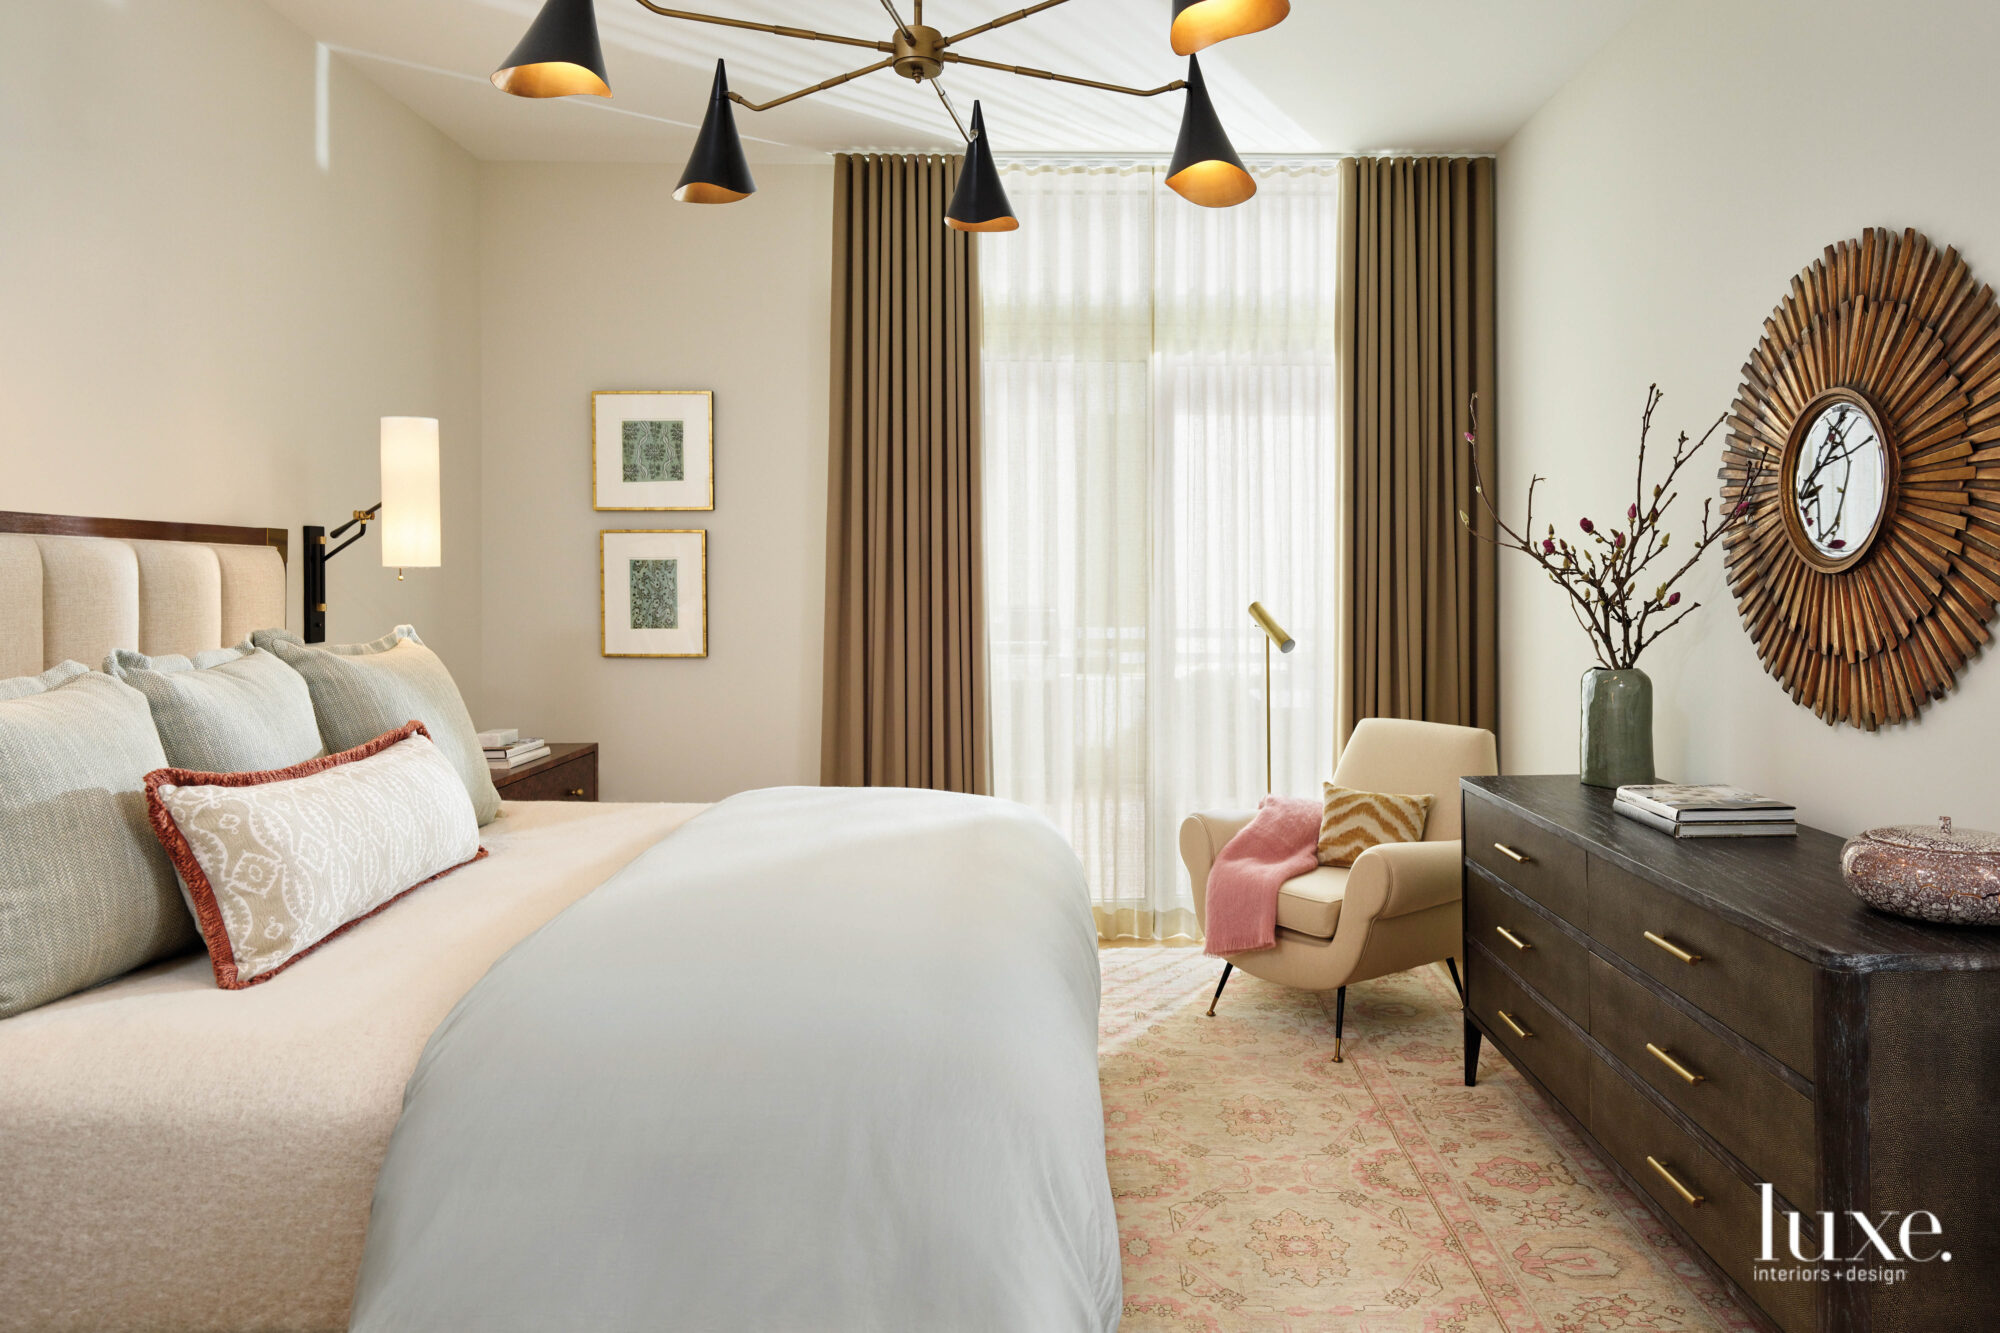 The clients' bedroom is decorated in shades of cream and blush with vintage furniture.